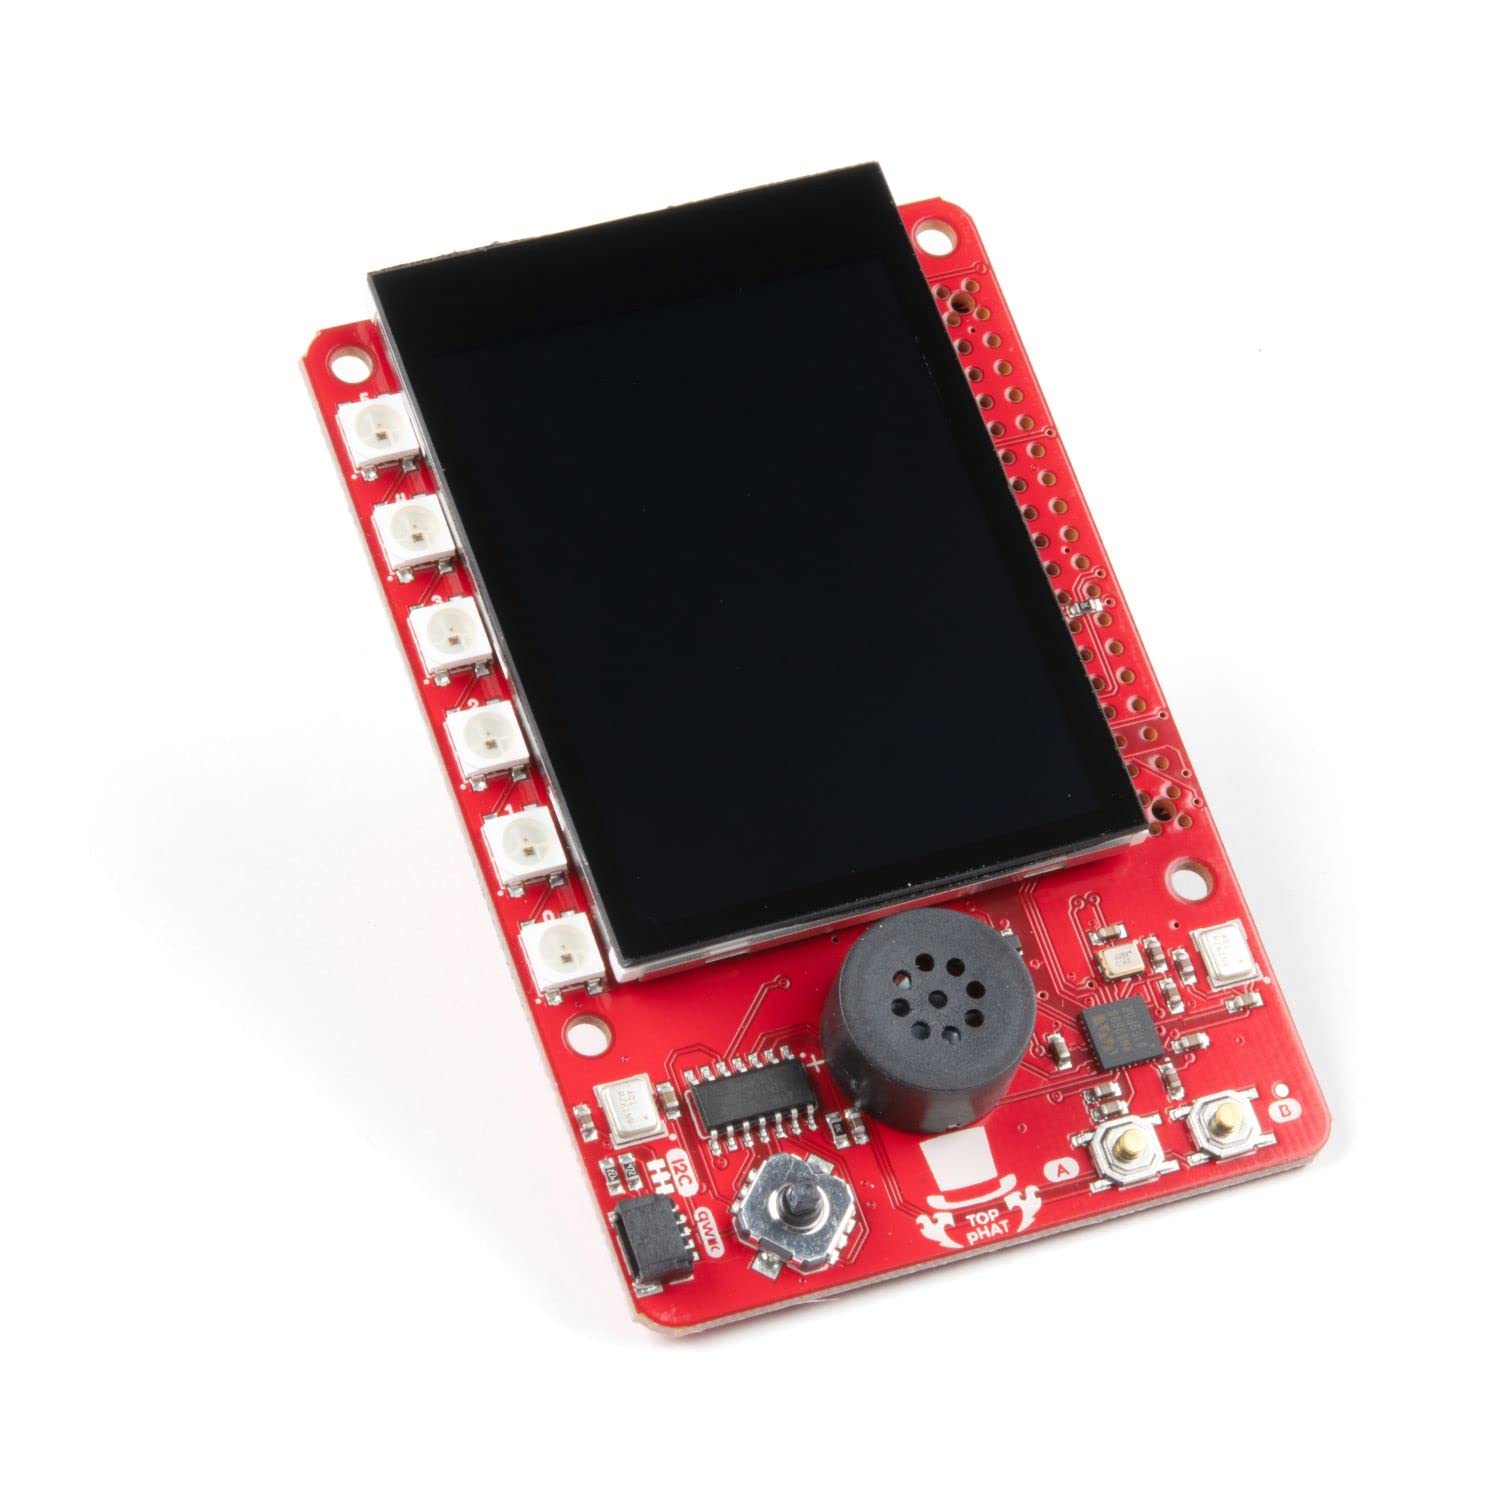 SparkFun Top pHAT for Raspberry Pi - Supports Machine Learning Voice Control Onboard Microphone & Speaker Two programmable Buttons & Joystick RGB LEDs Offswitch for Rpi 2.4" TFT LCD Display